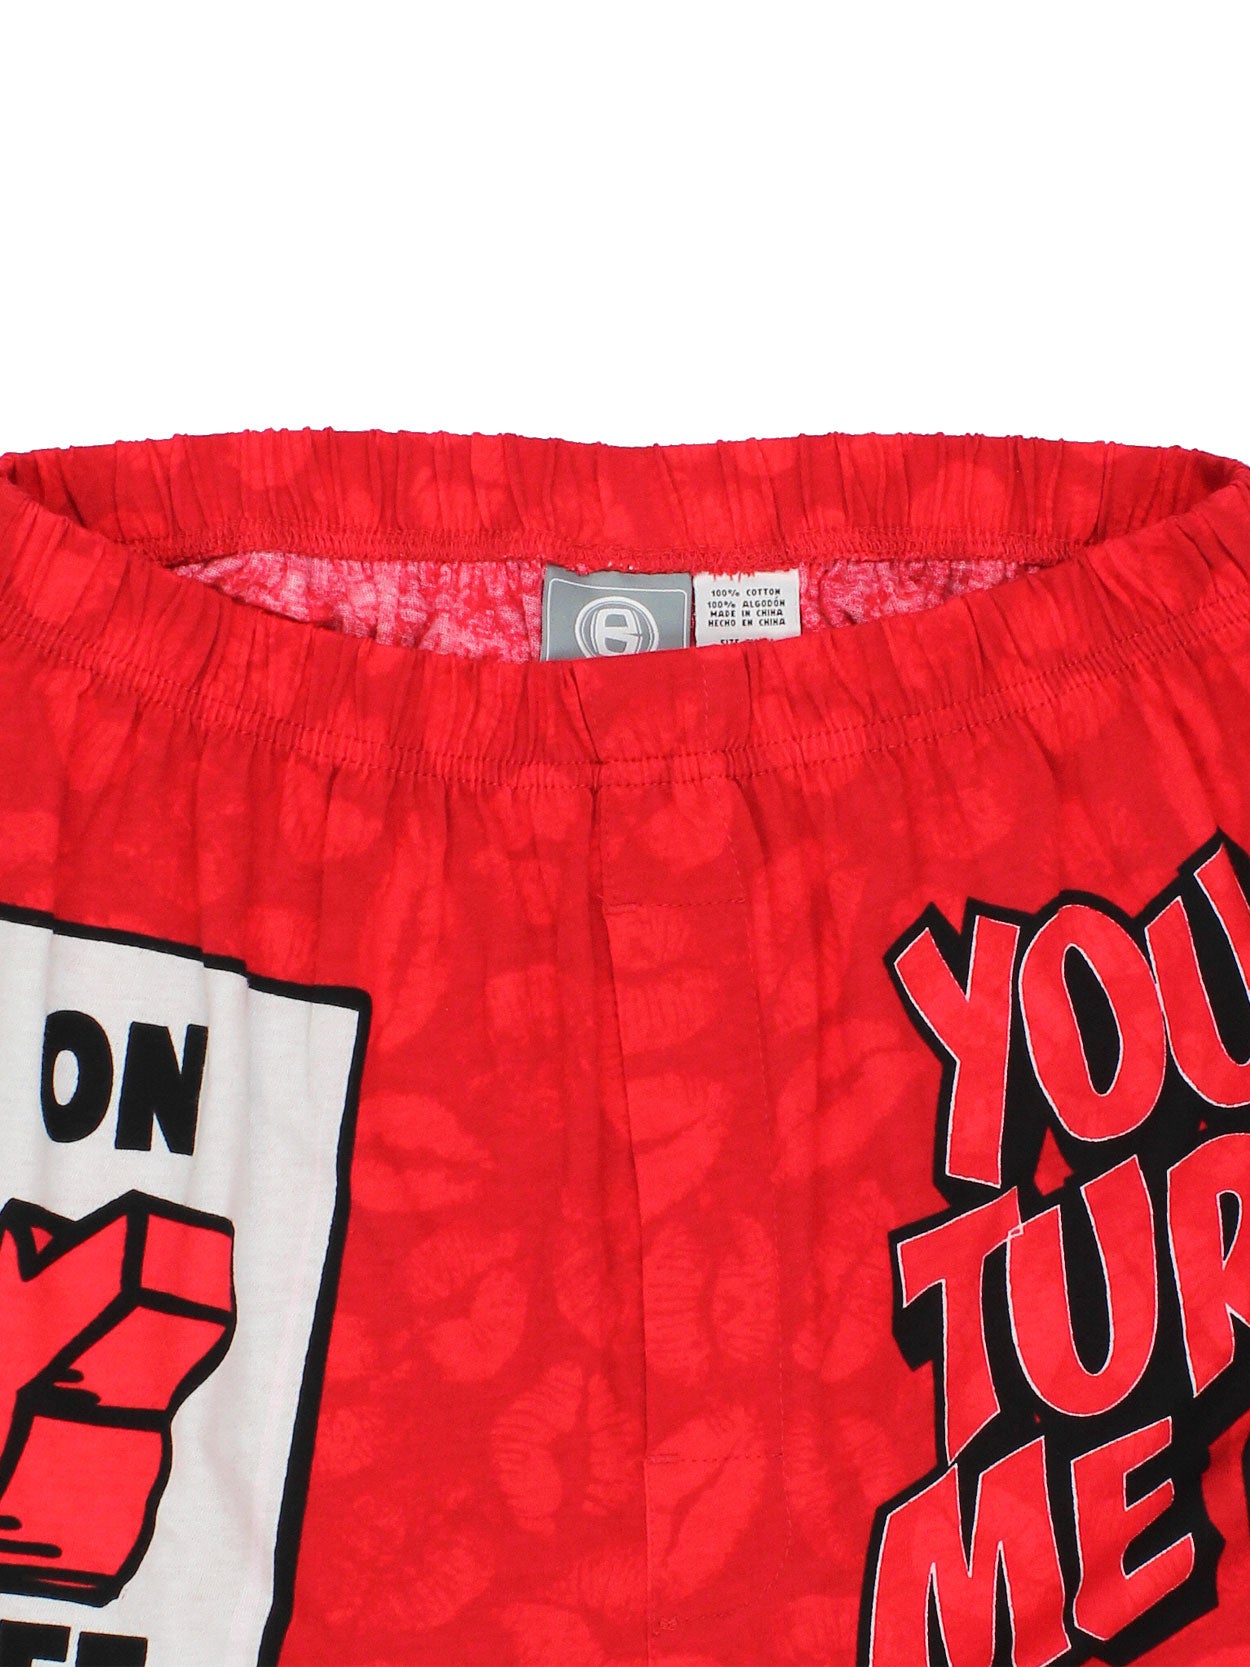 You Turn Me On Boxer Shorts